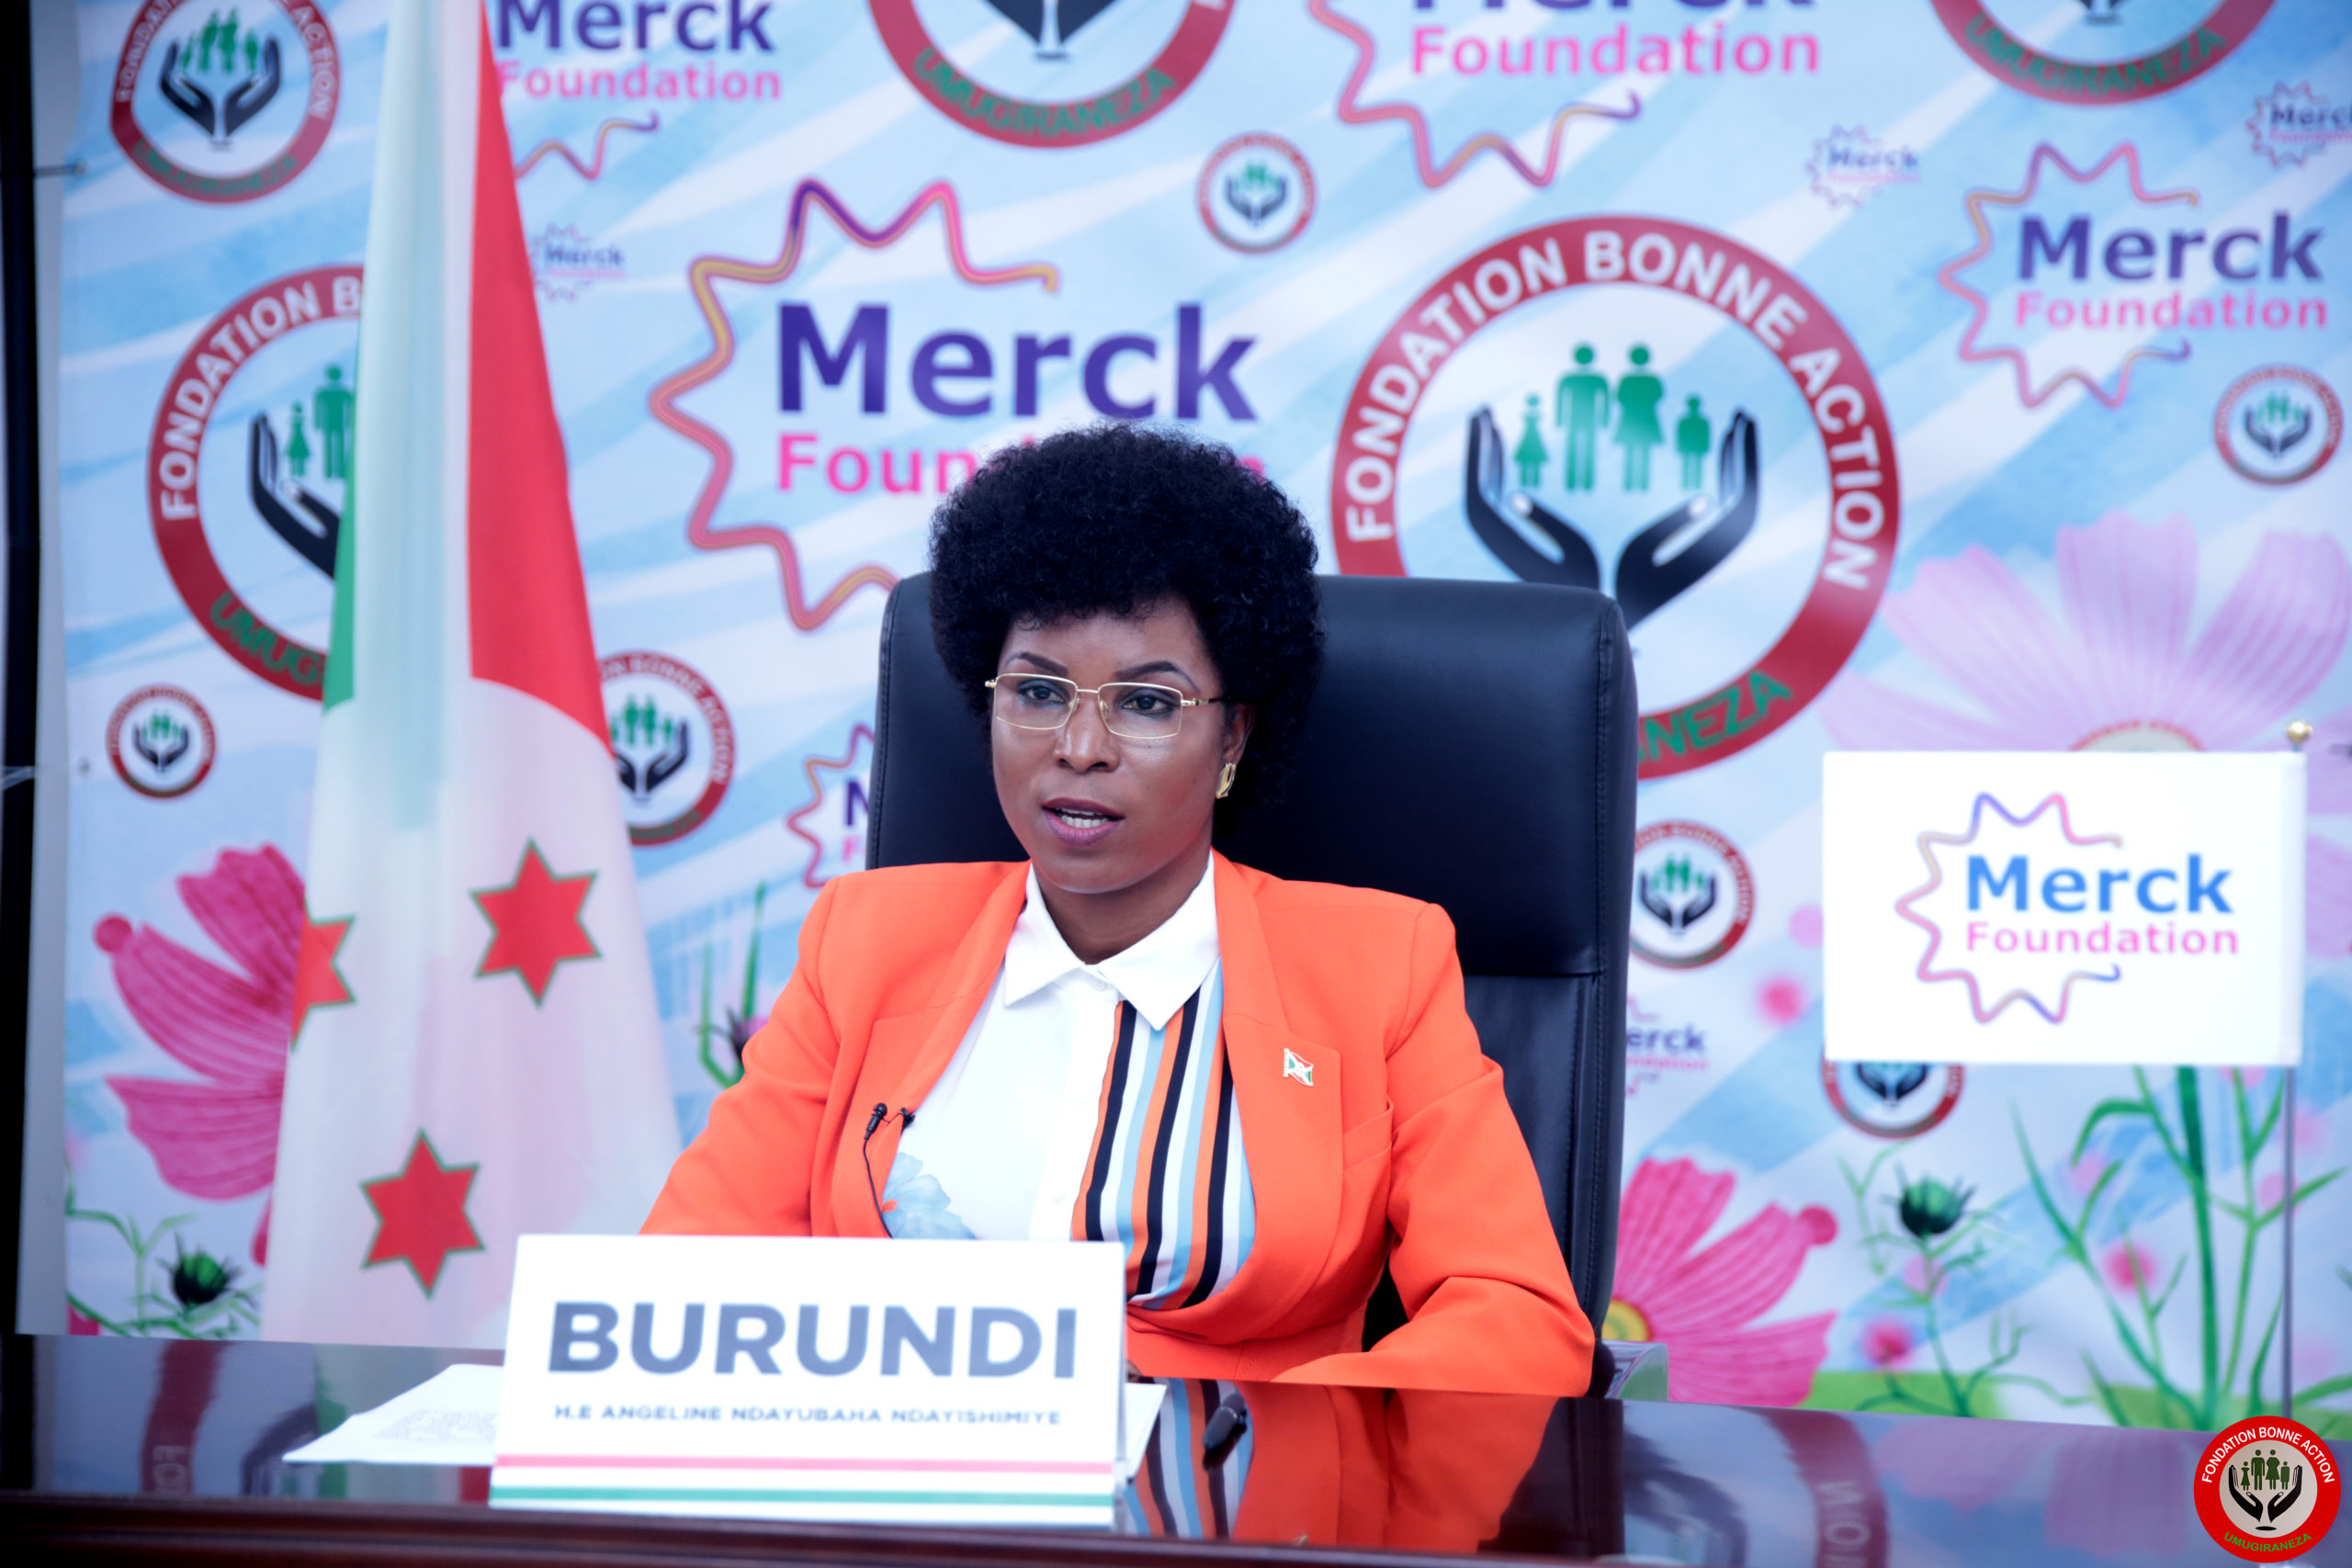 The First Lady of Burundi participates in the 8th edition of MERCK Foundation Africa Asia Luminary